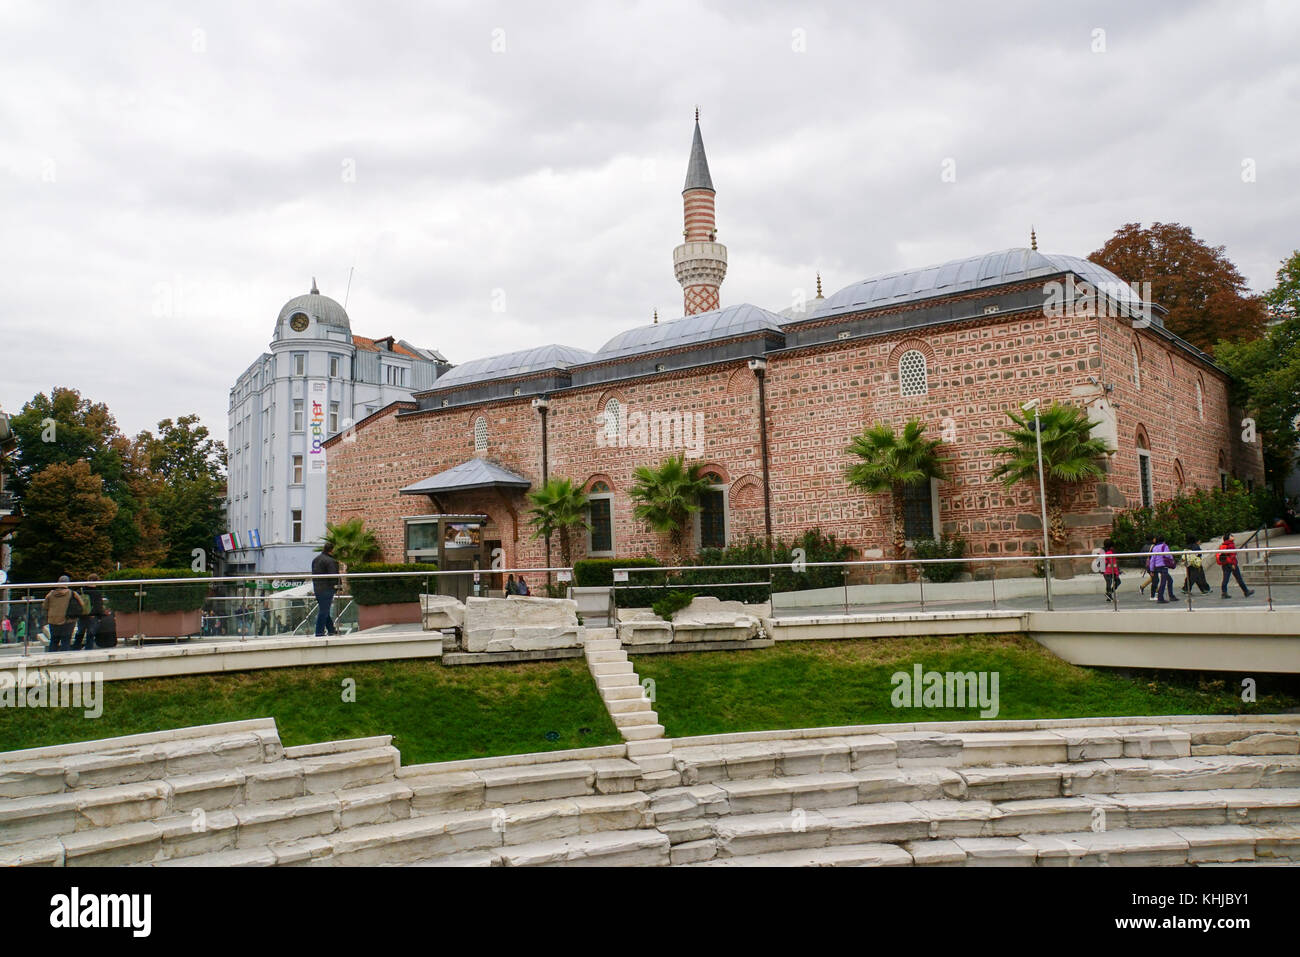 The Roman theatre of Plovdiv. The mosque in the background Stock Photo